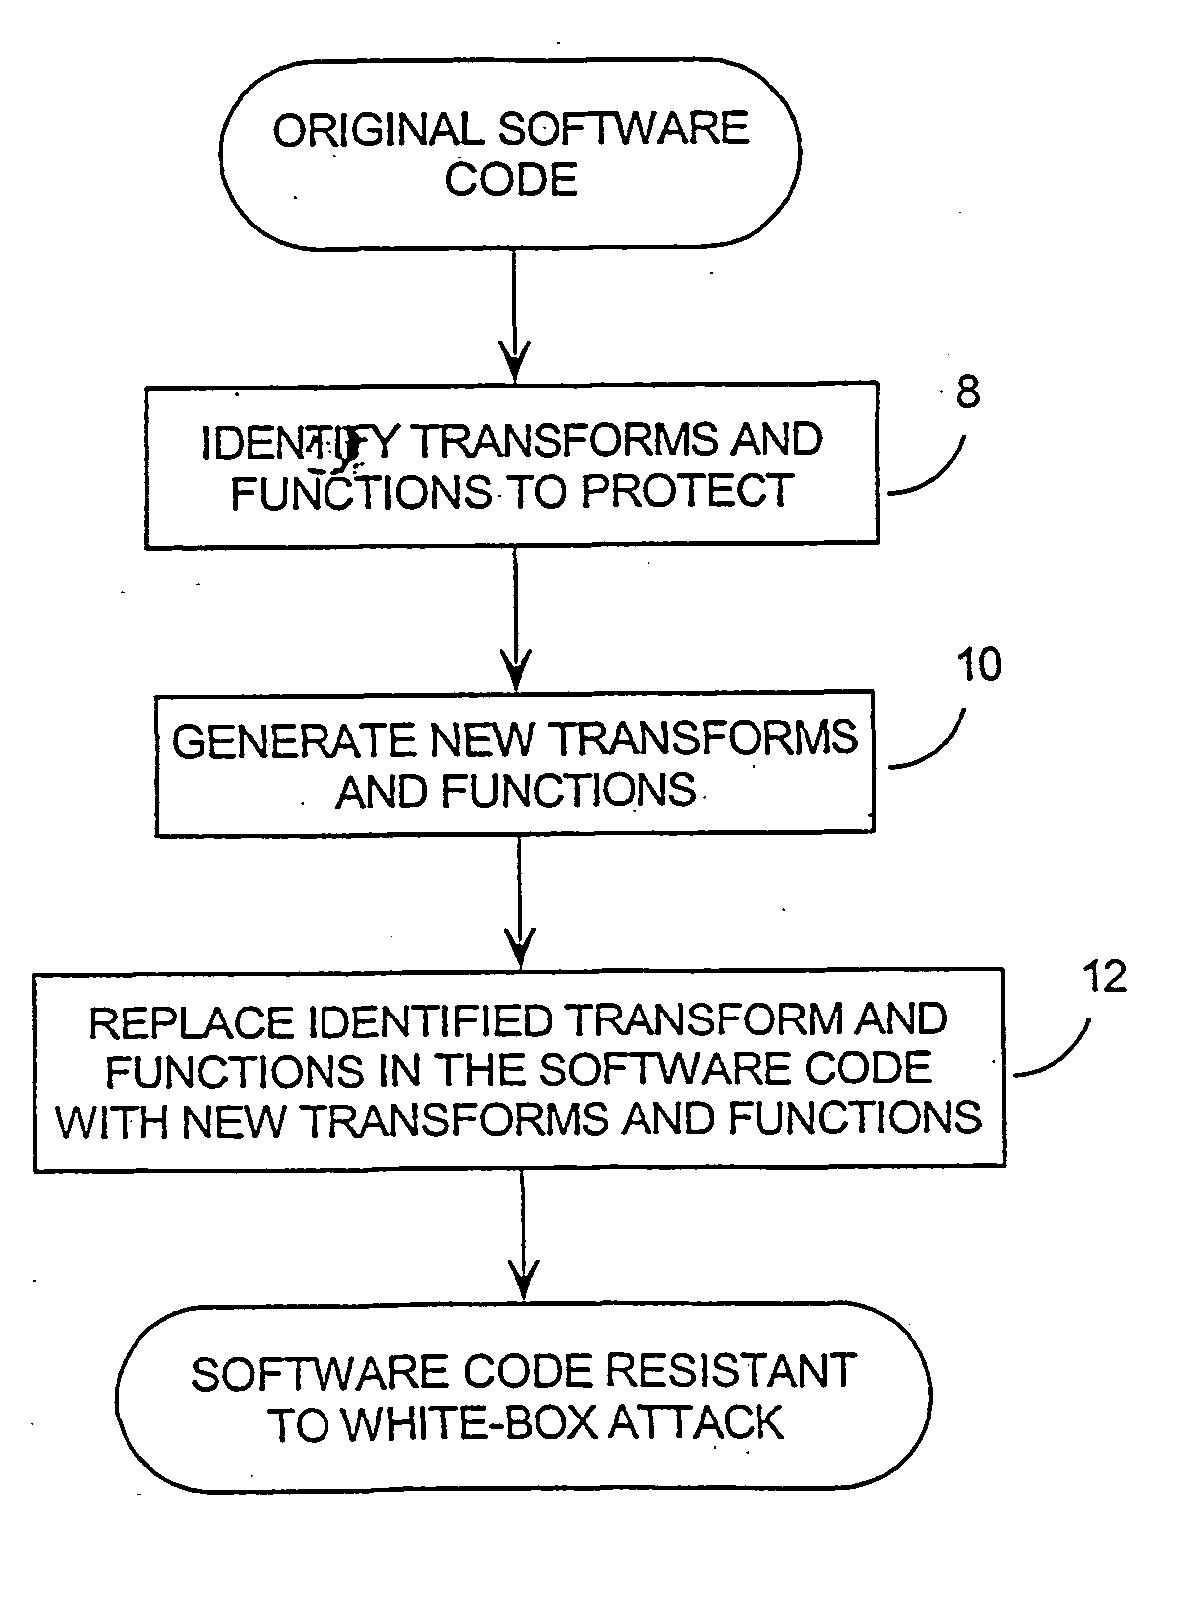 System and method for protecting computer software from a white box attack